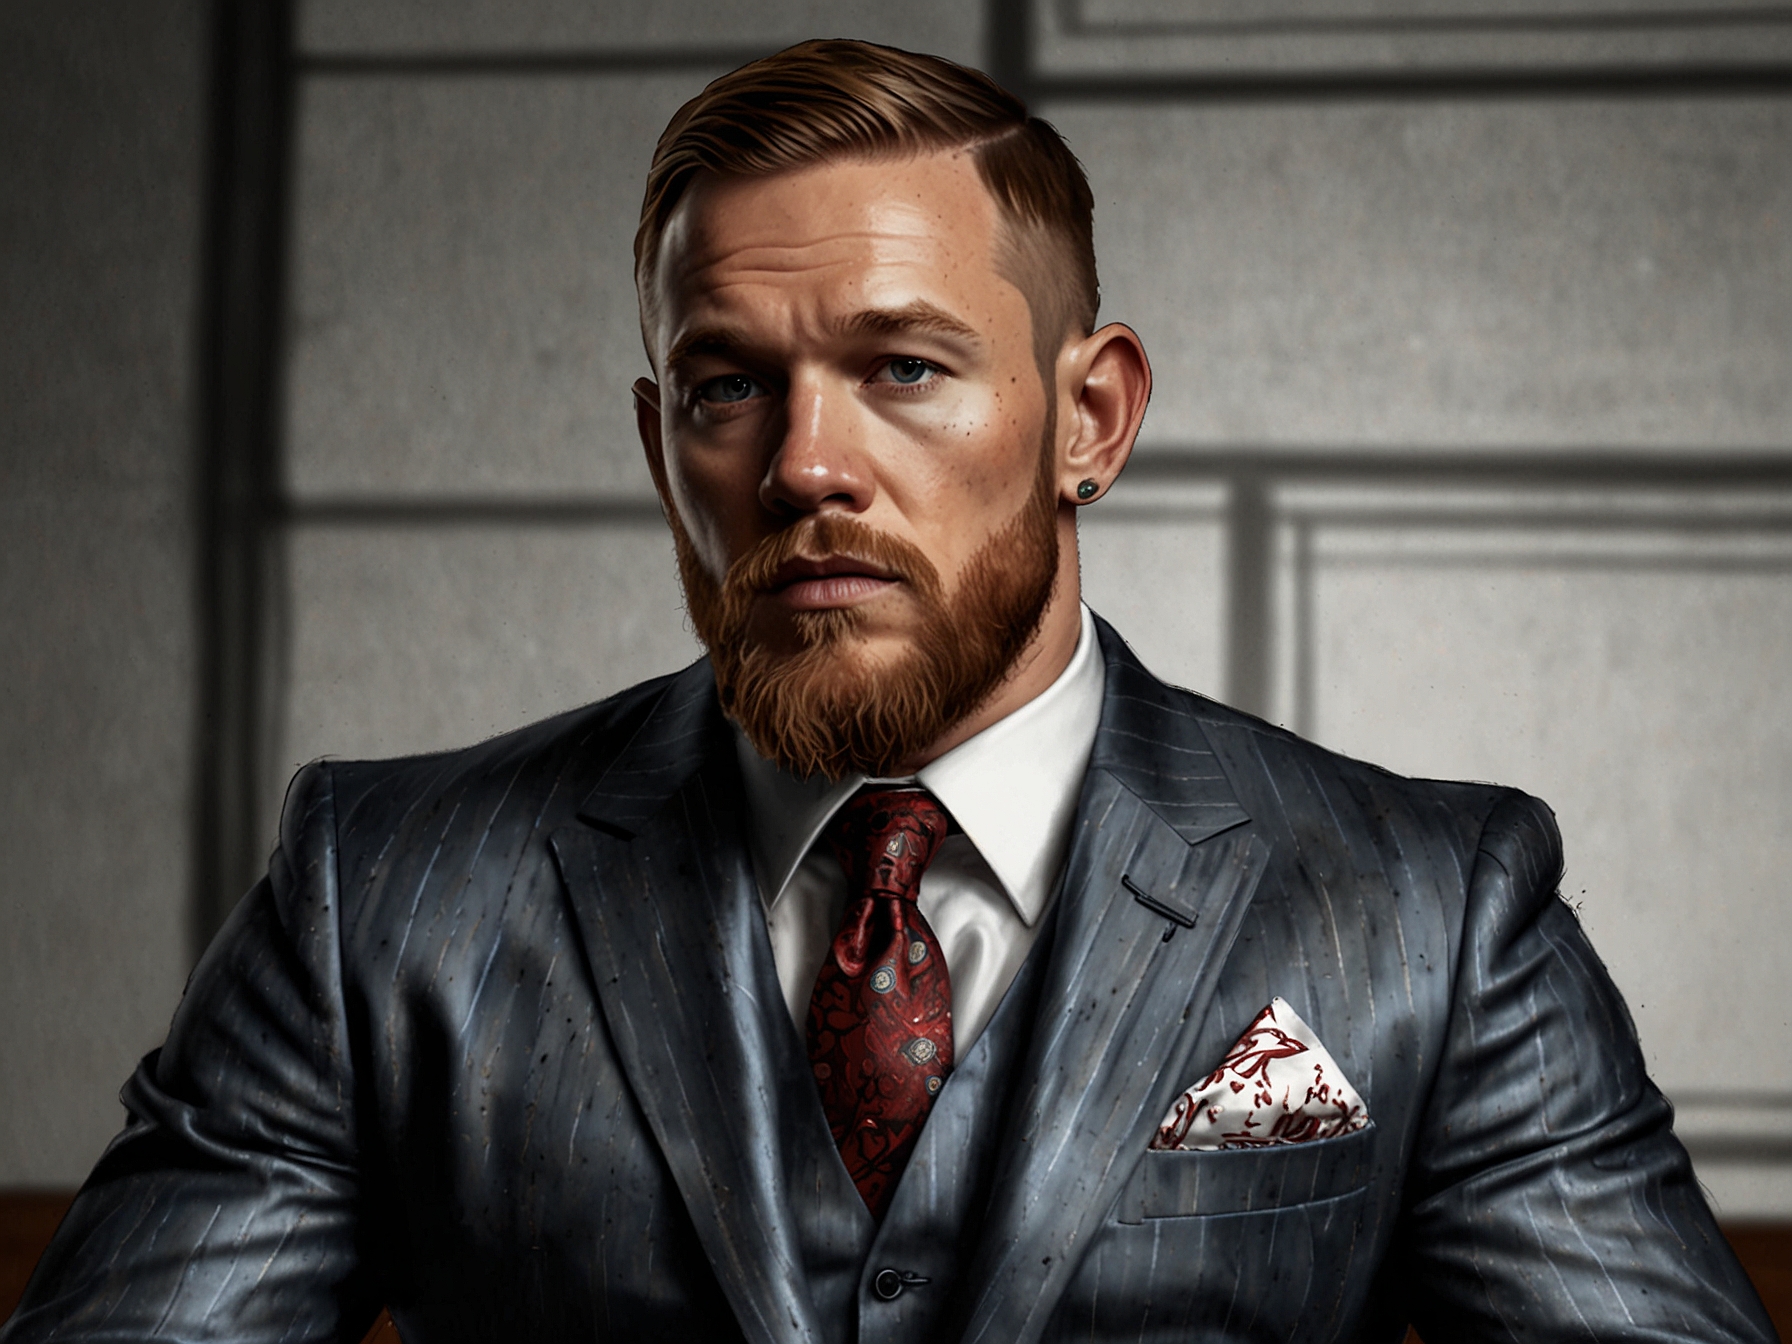 Conor McGregor speaking to the press, addressing his recent leg injury and future in MMA.